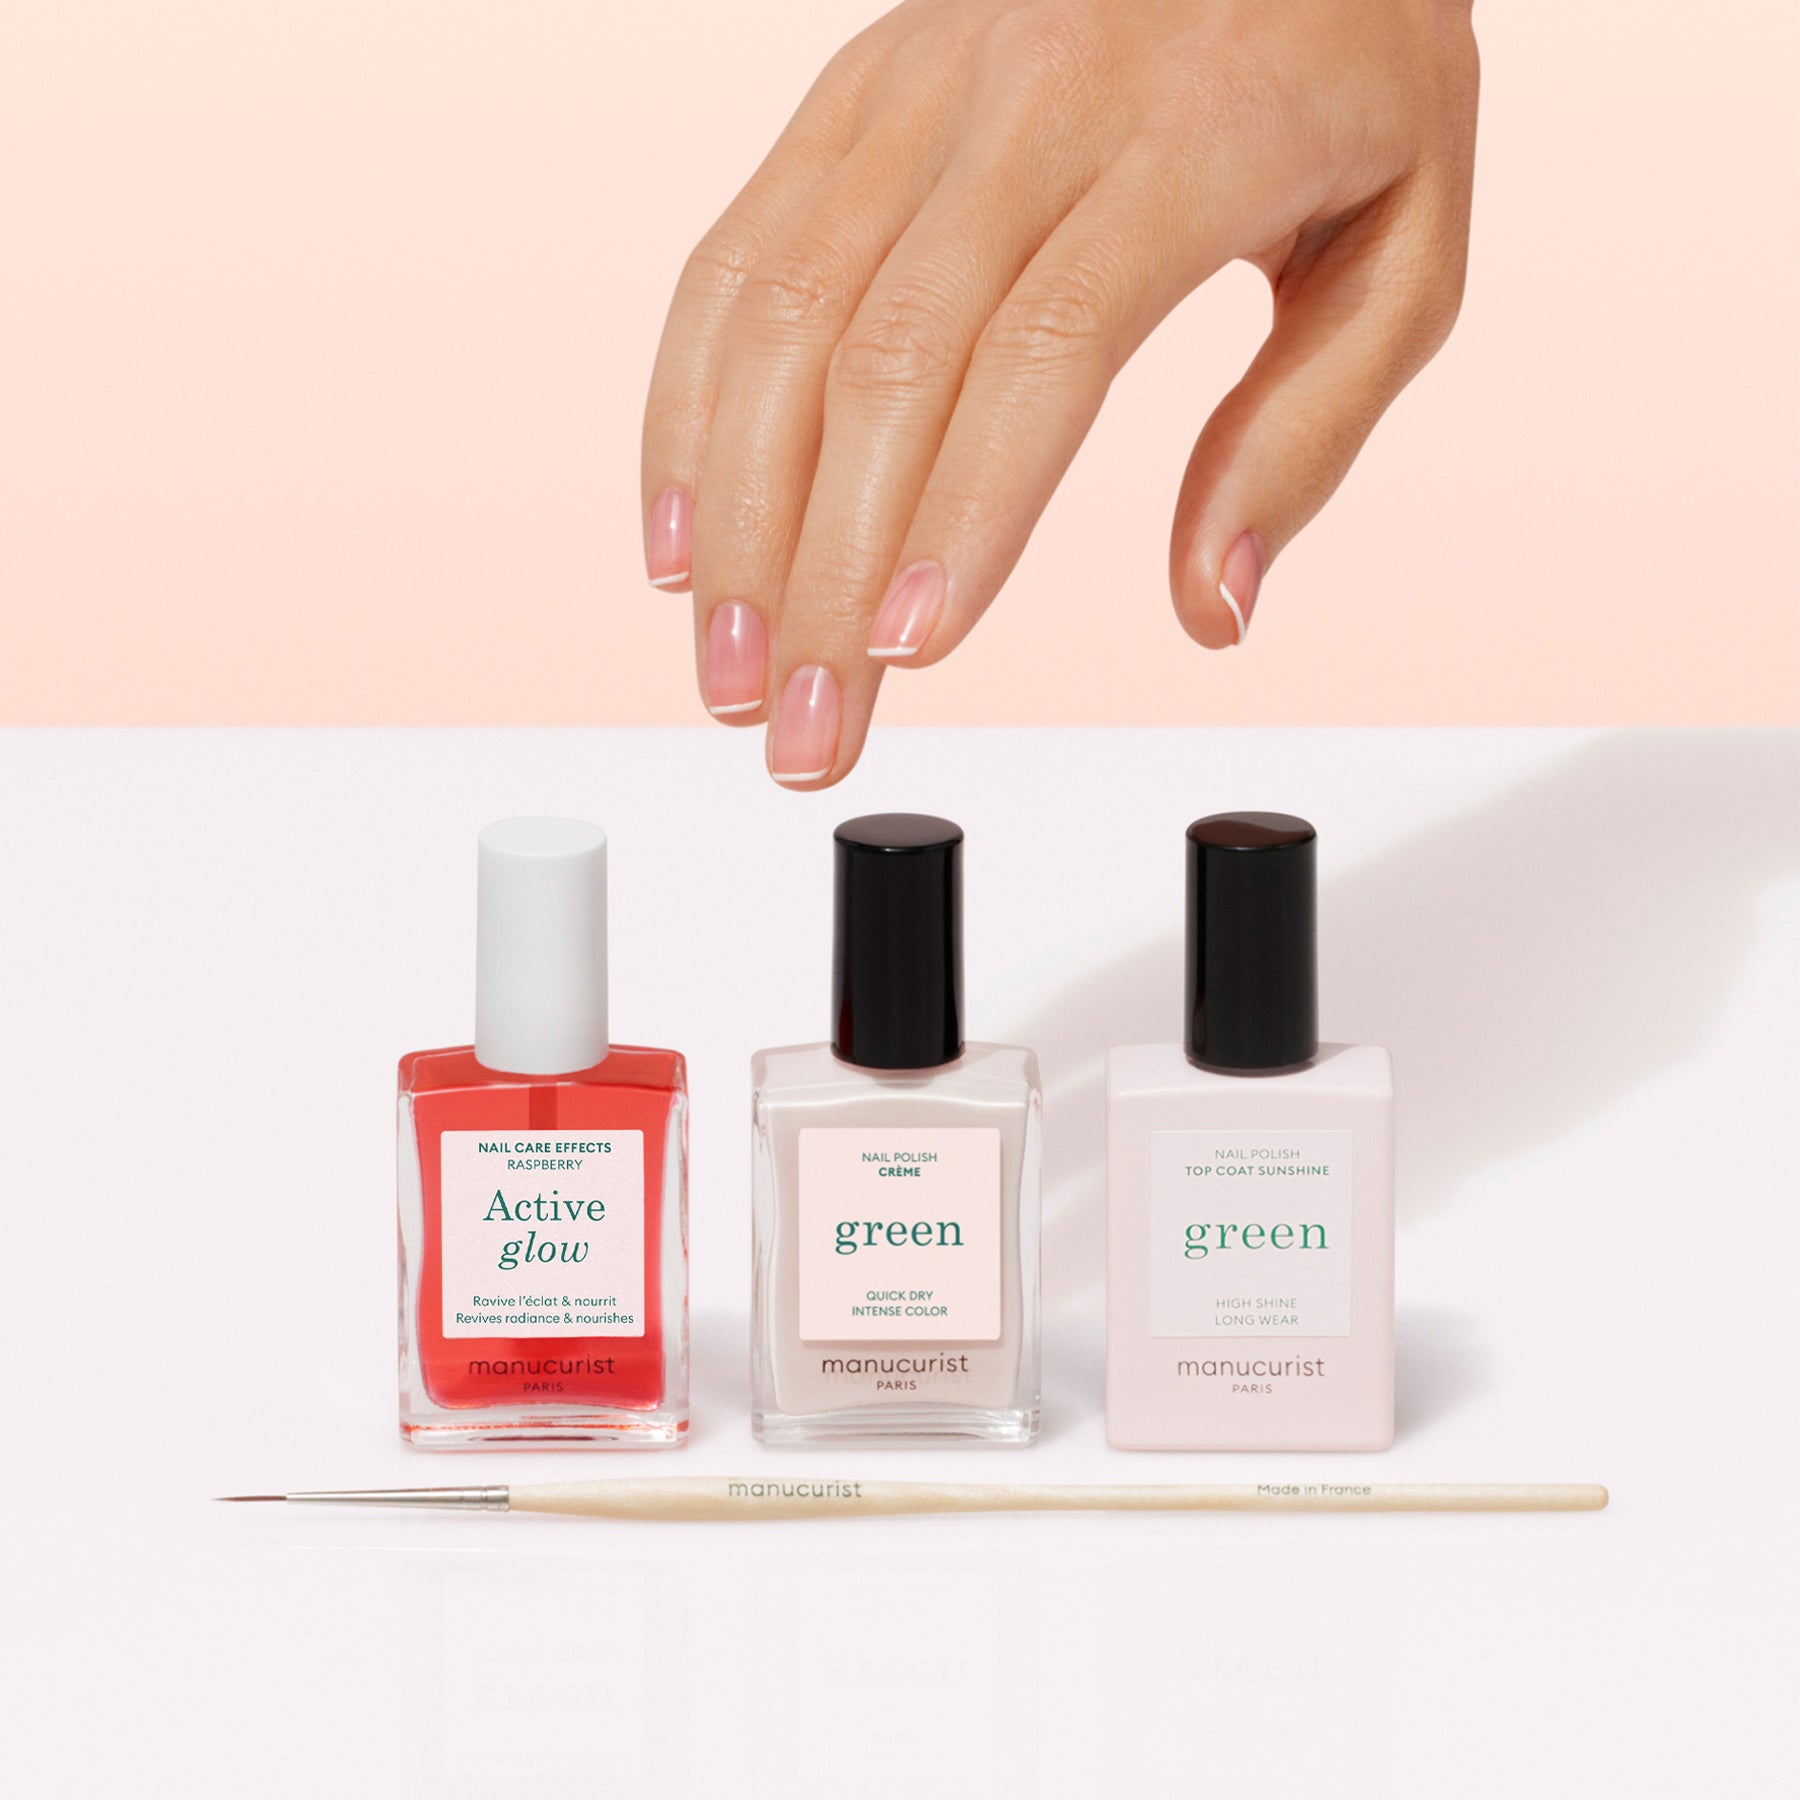 Try the Deconstructed French Manicure for a Fresh Take on the Classic Look